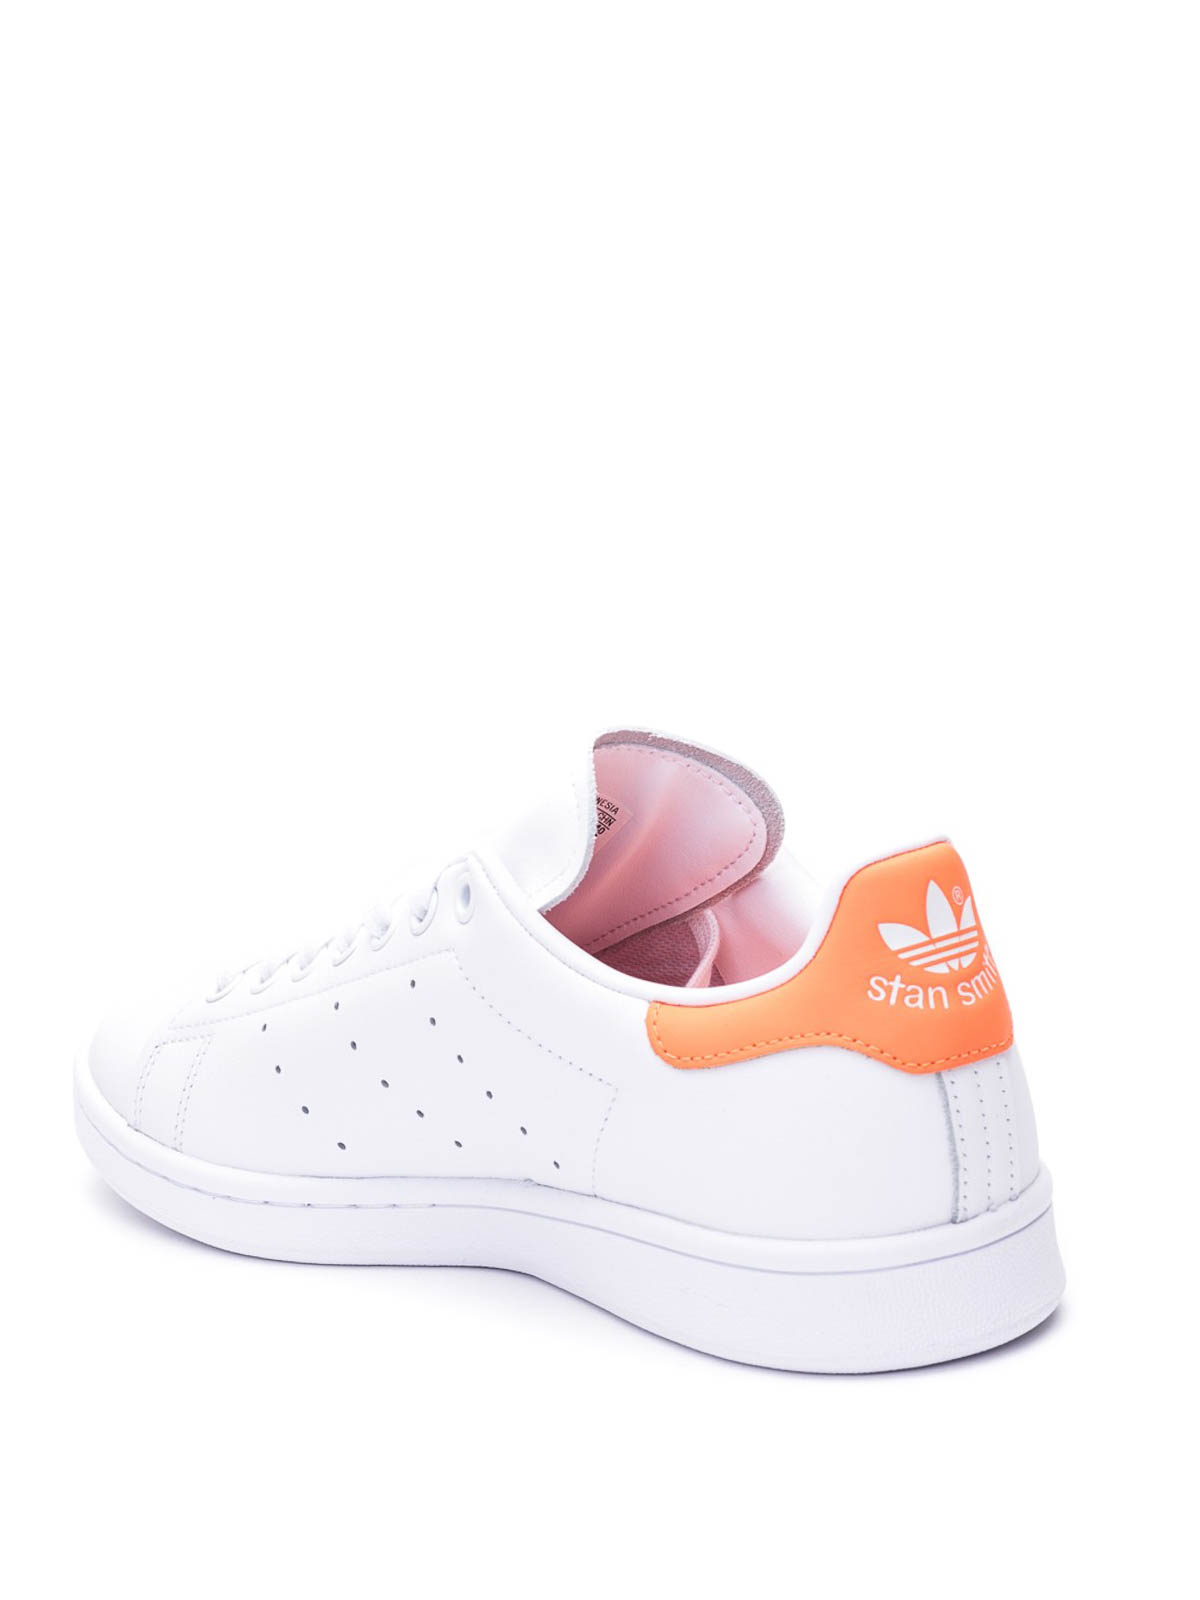 Noble Asimilar torpe Trainers Adidas Originals - Stan Smith leather sneakers - EE5863WH